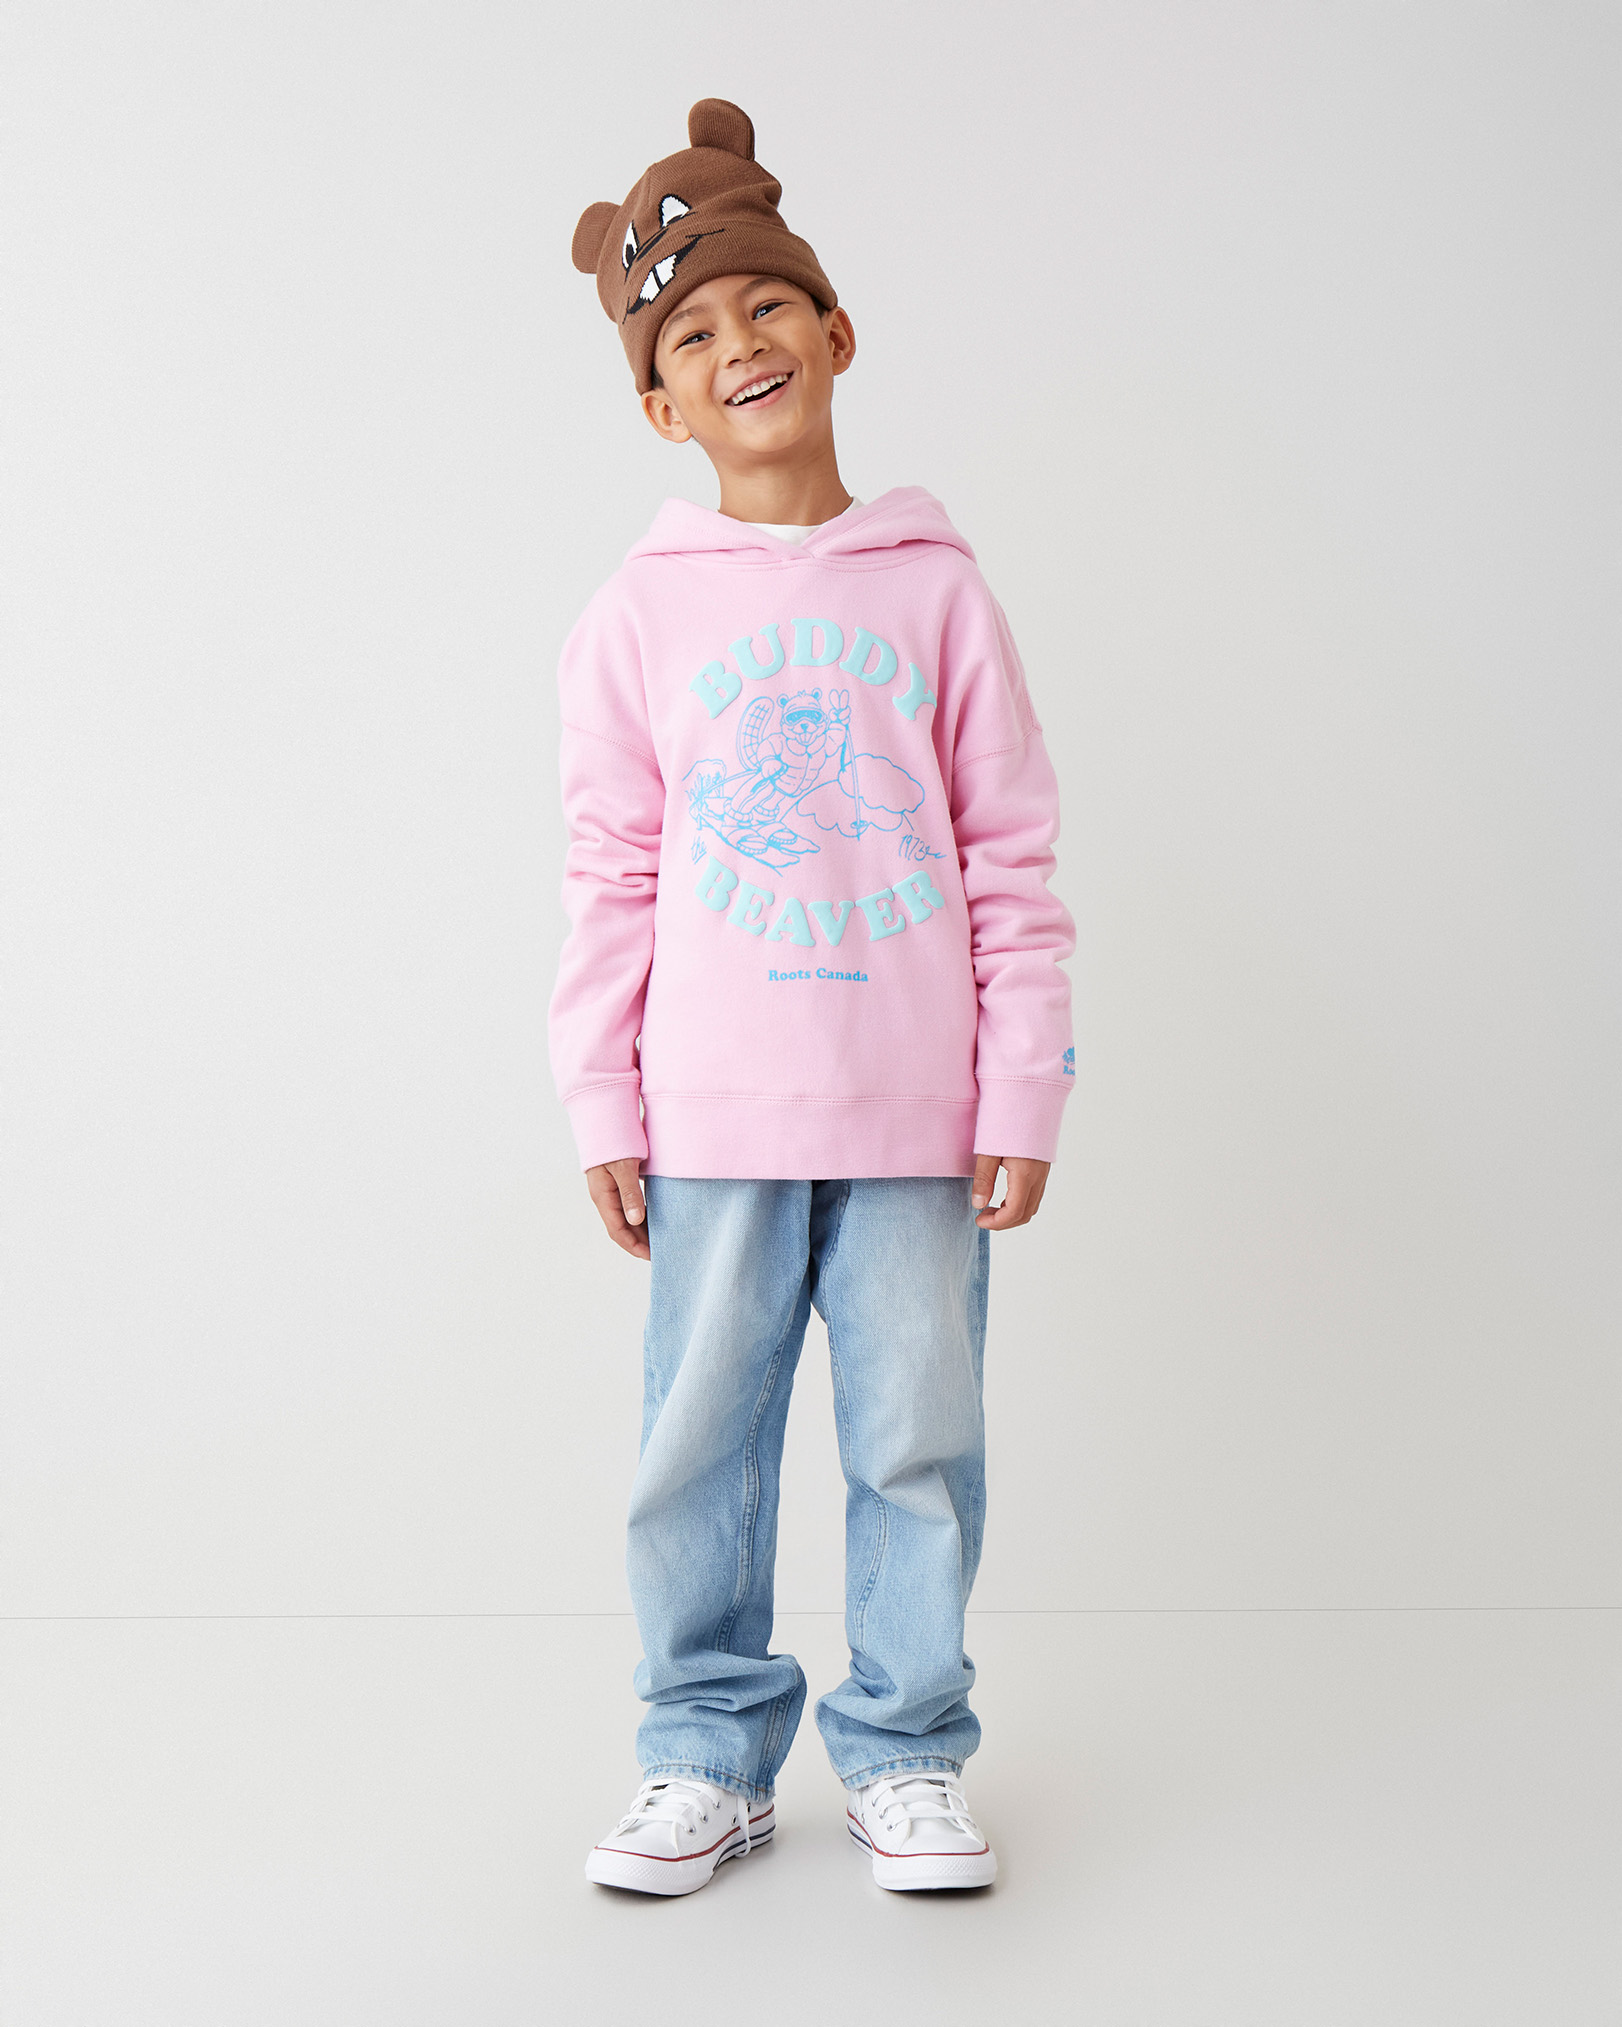 Roots Kids Buddy Relaxed Hoodie Jacket in Bonbon